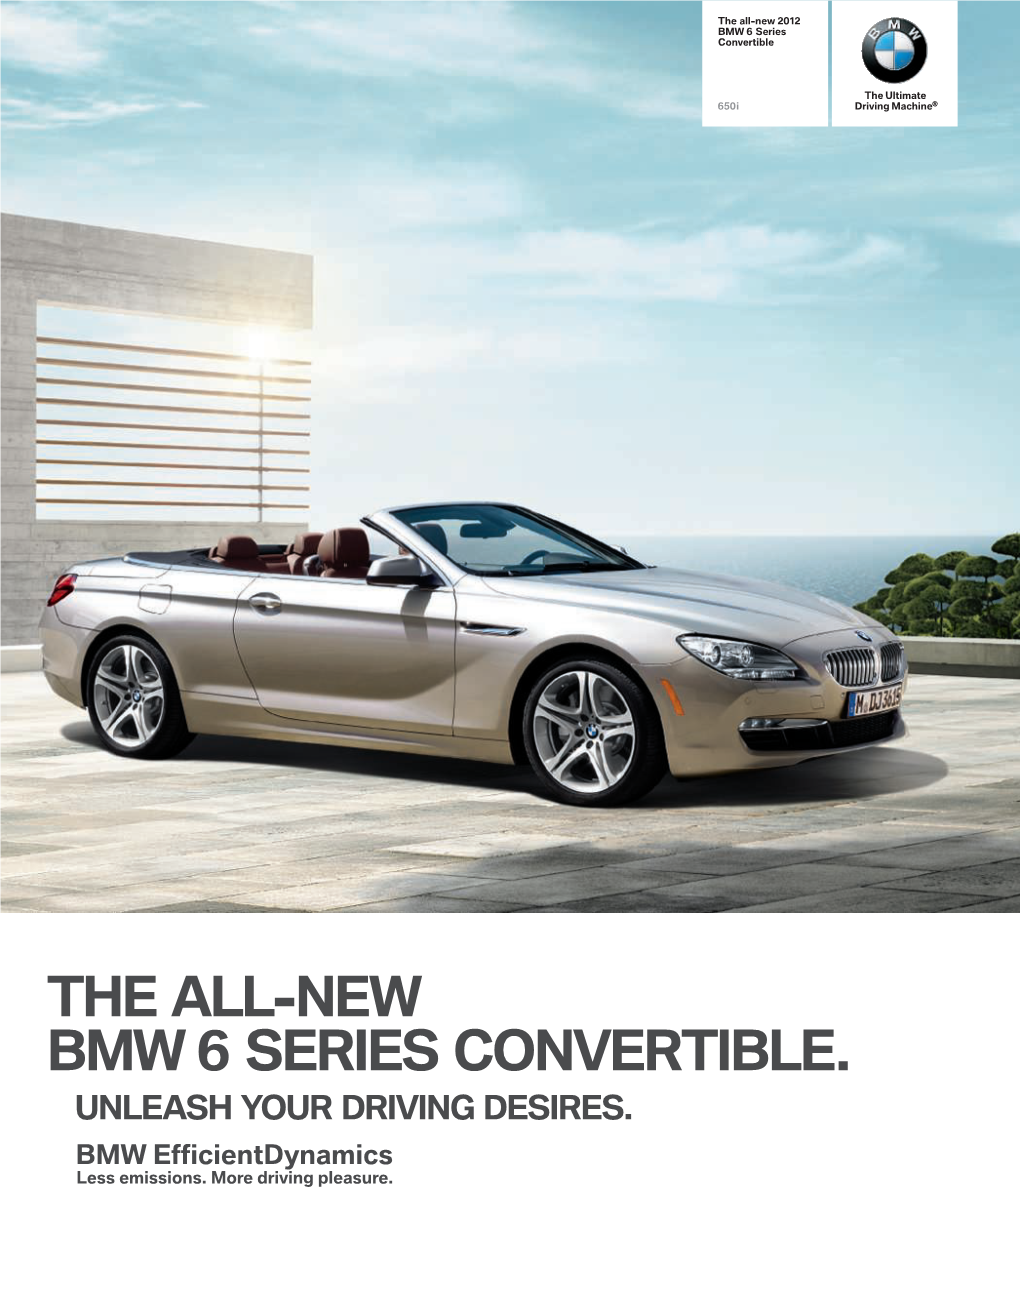 The All-New Bmw Series Convertible